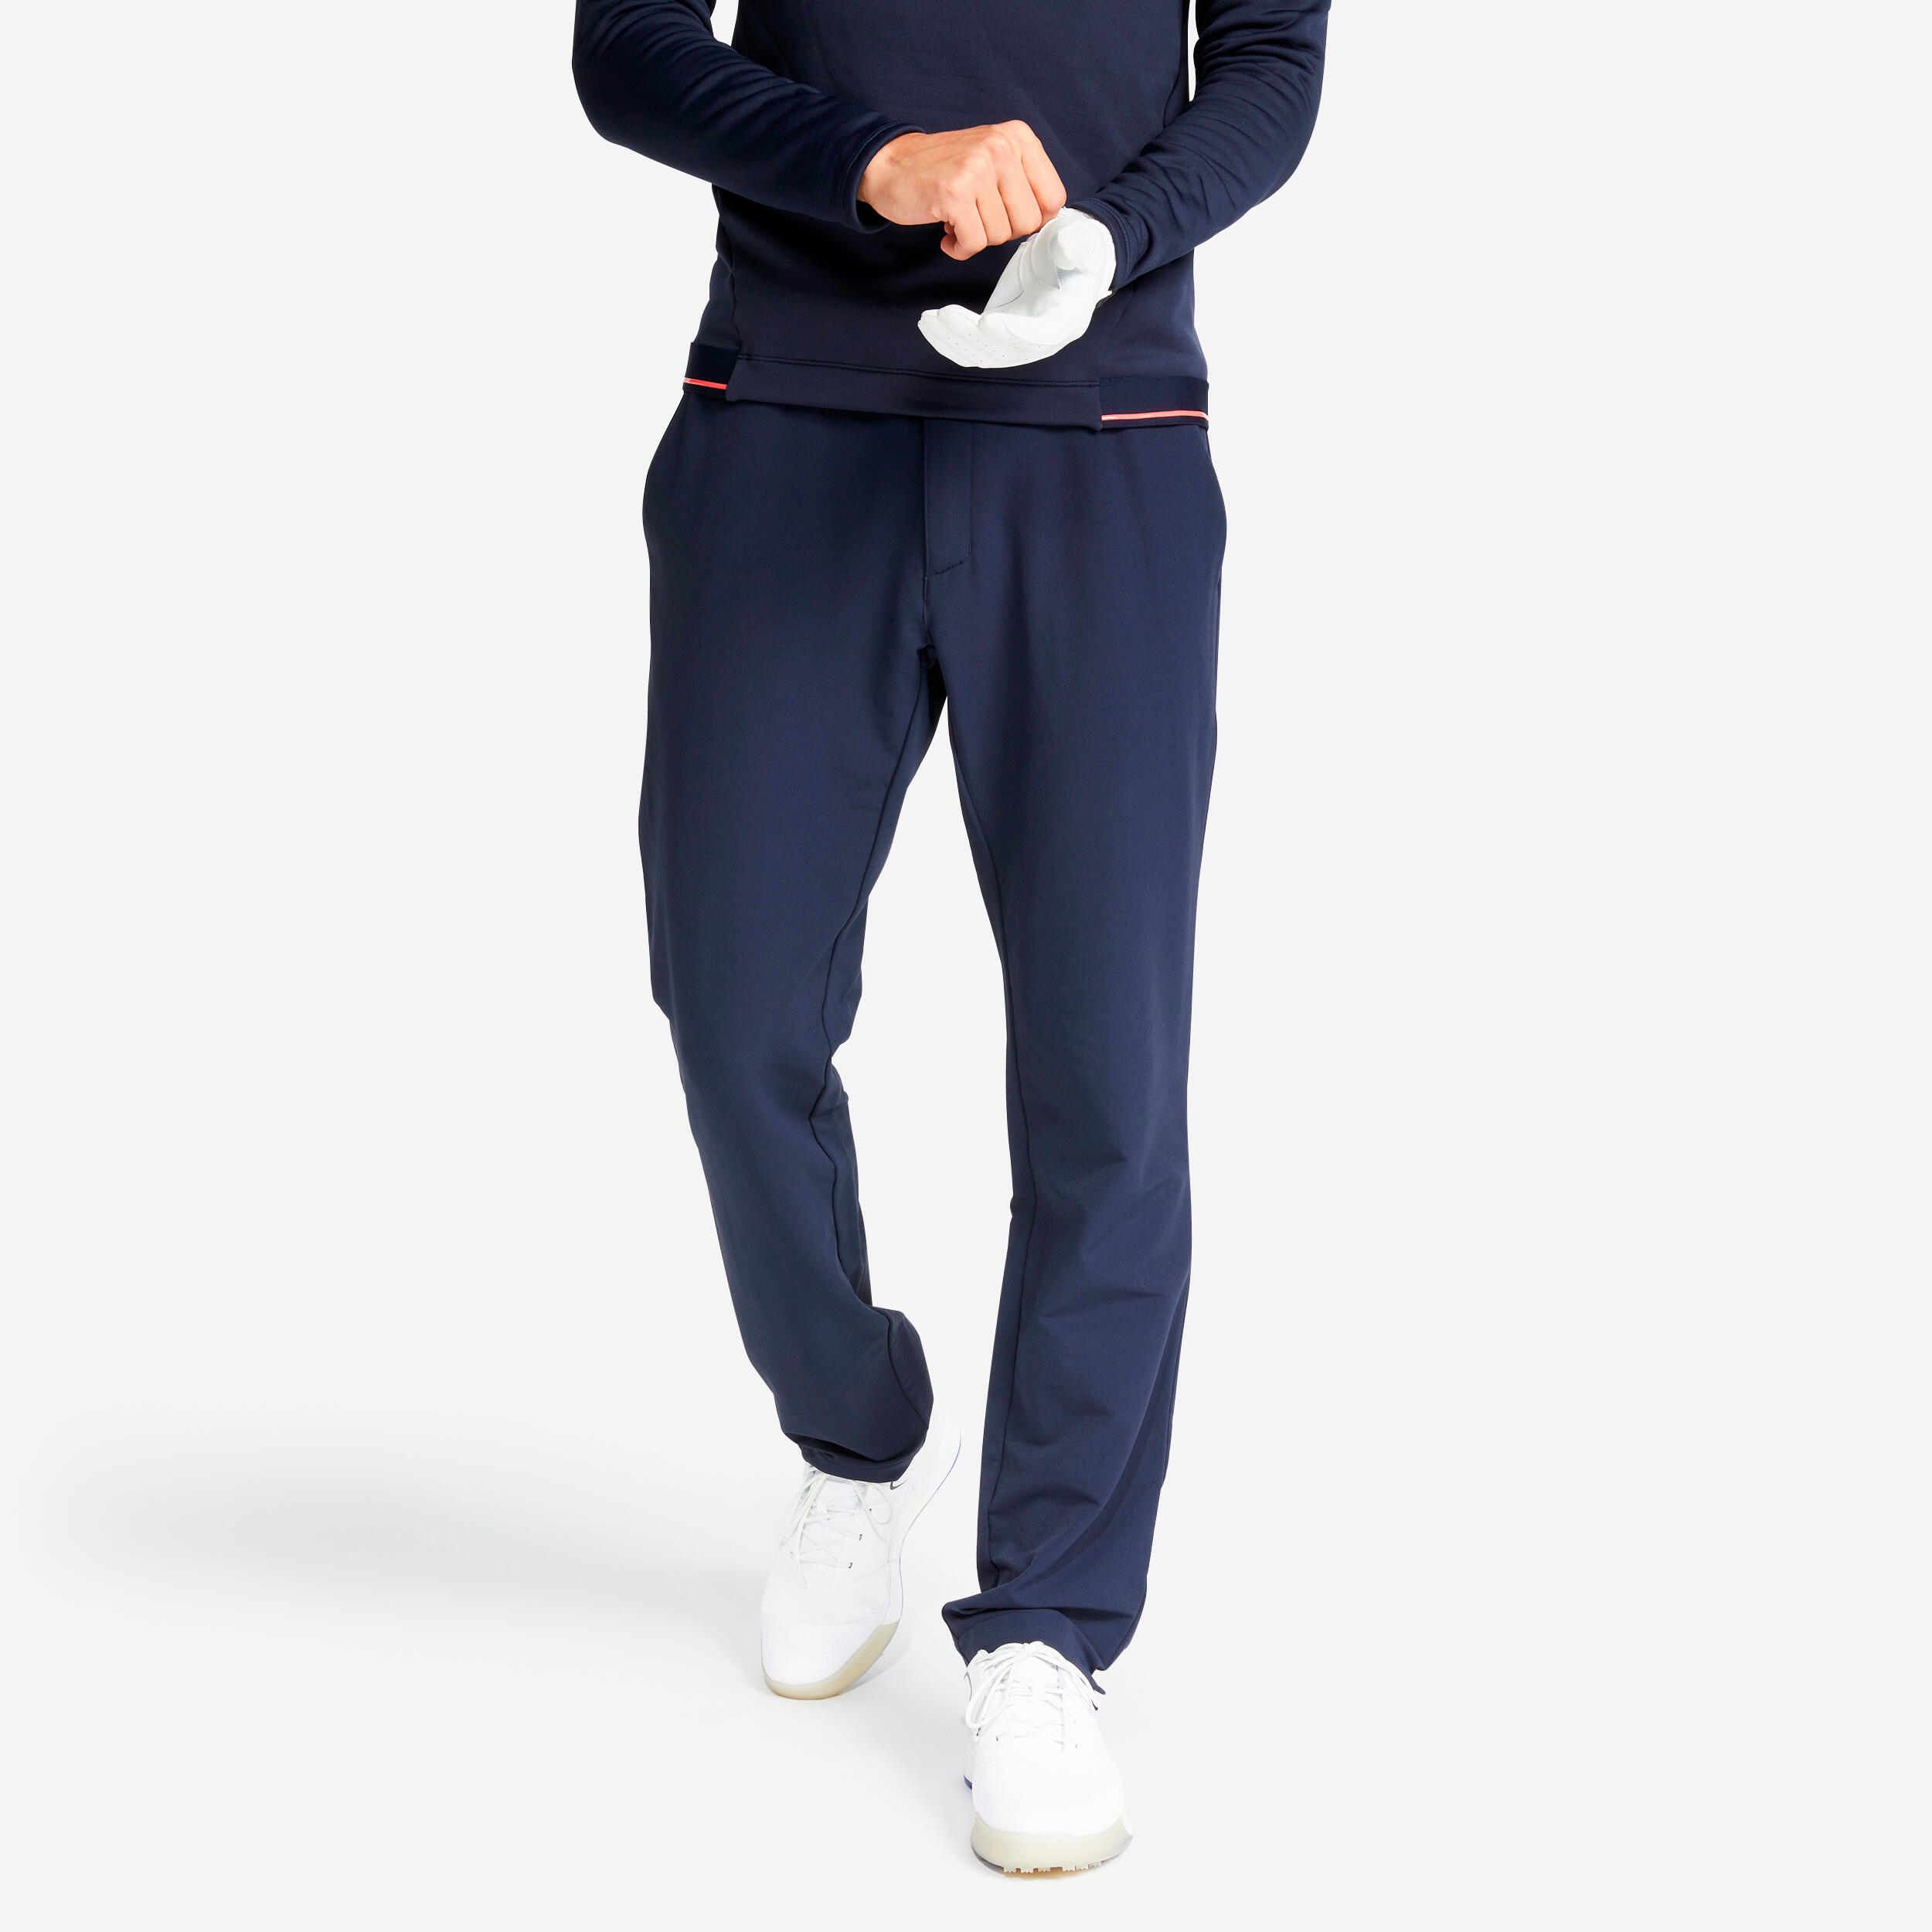 Mens golf winter trousers CW500 navy blue